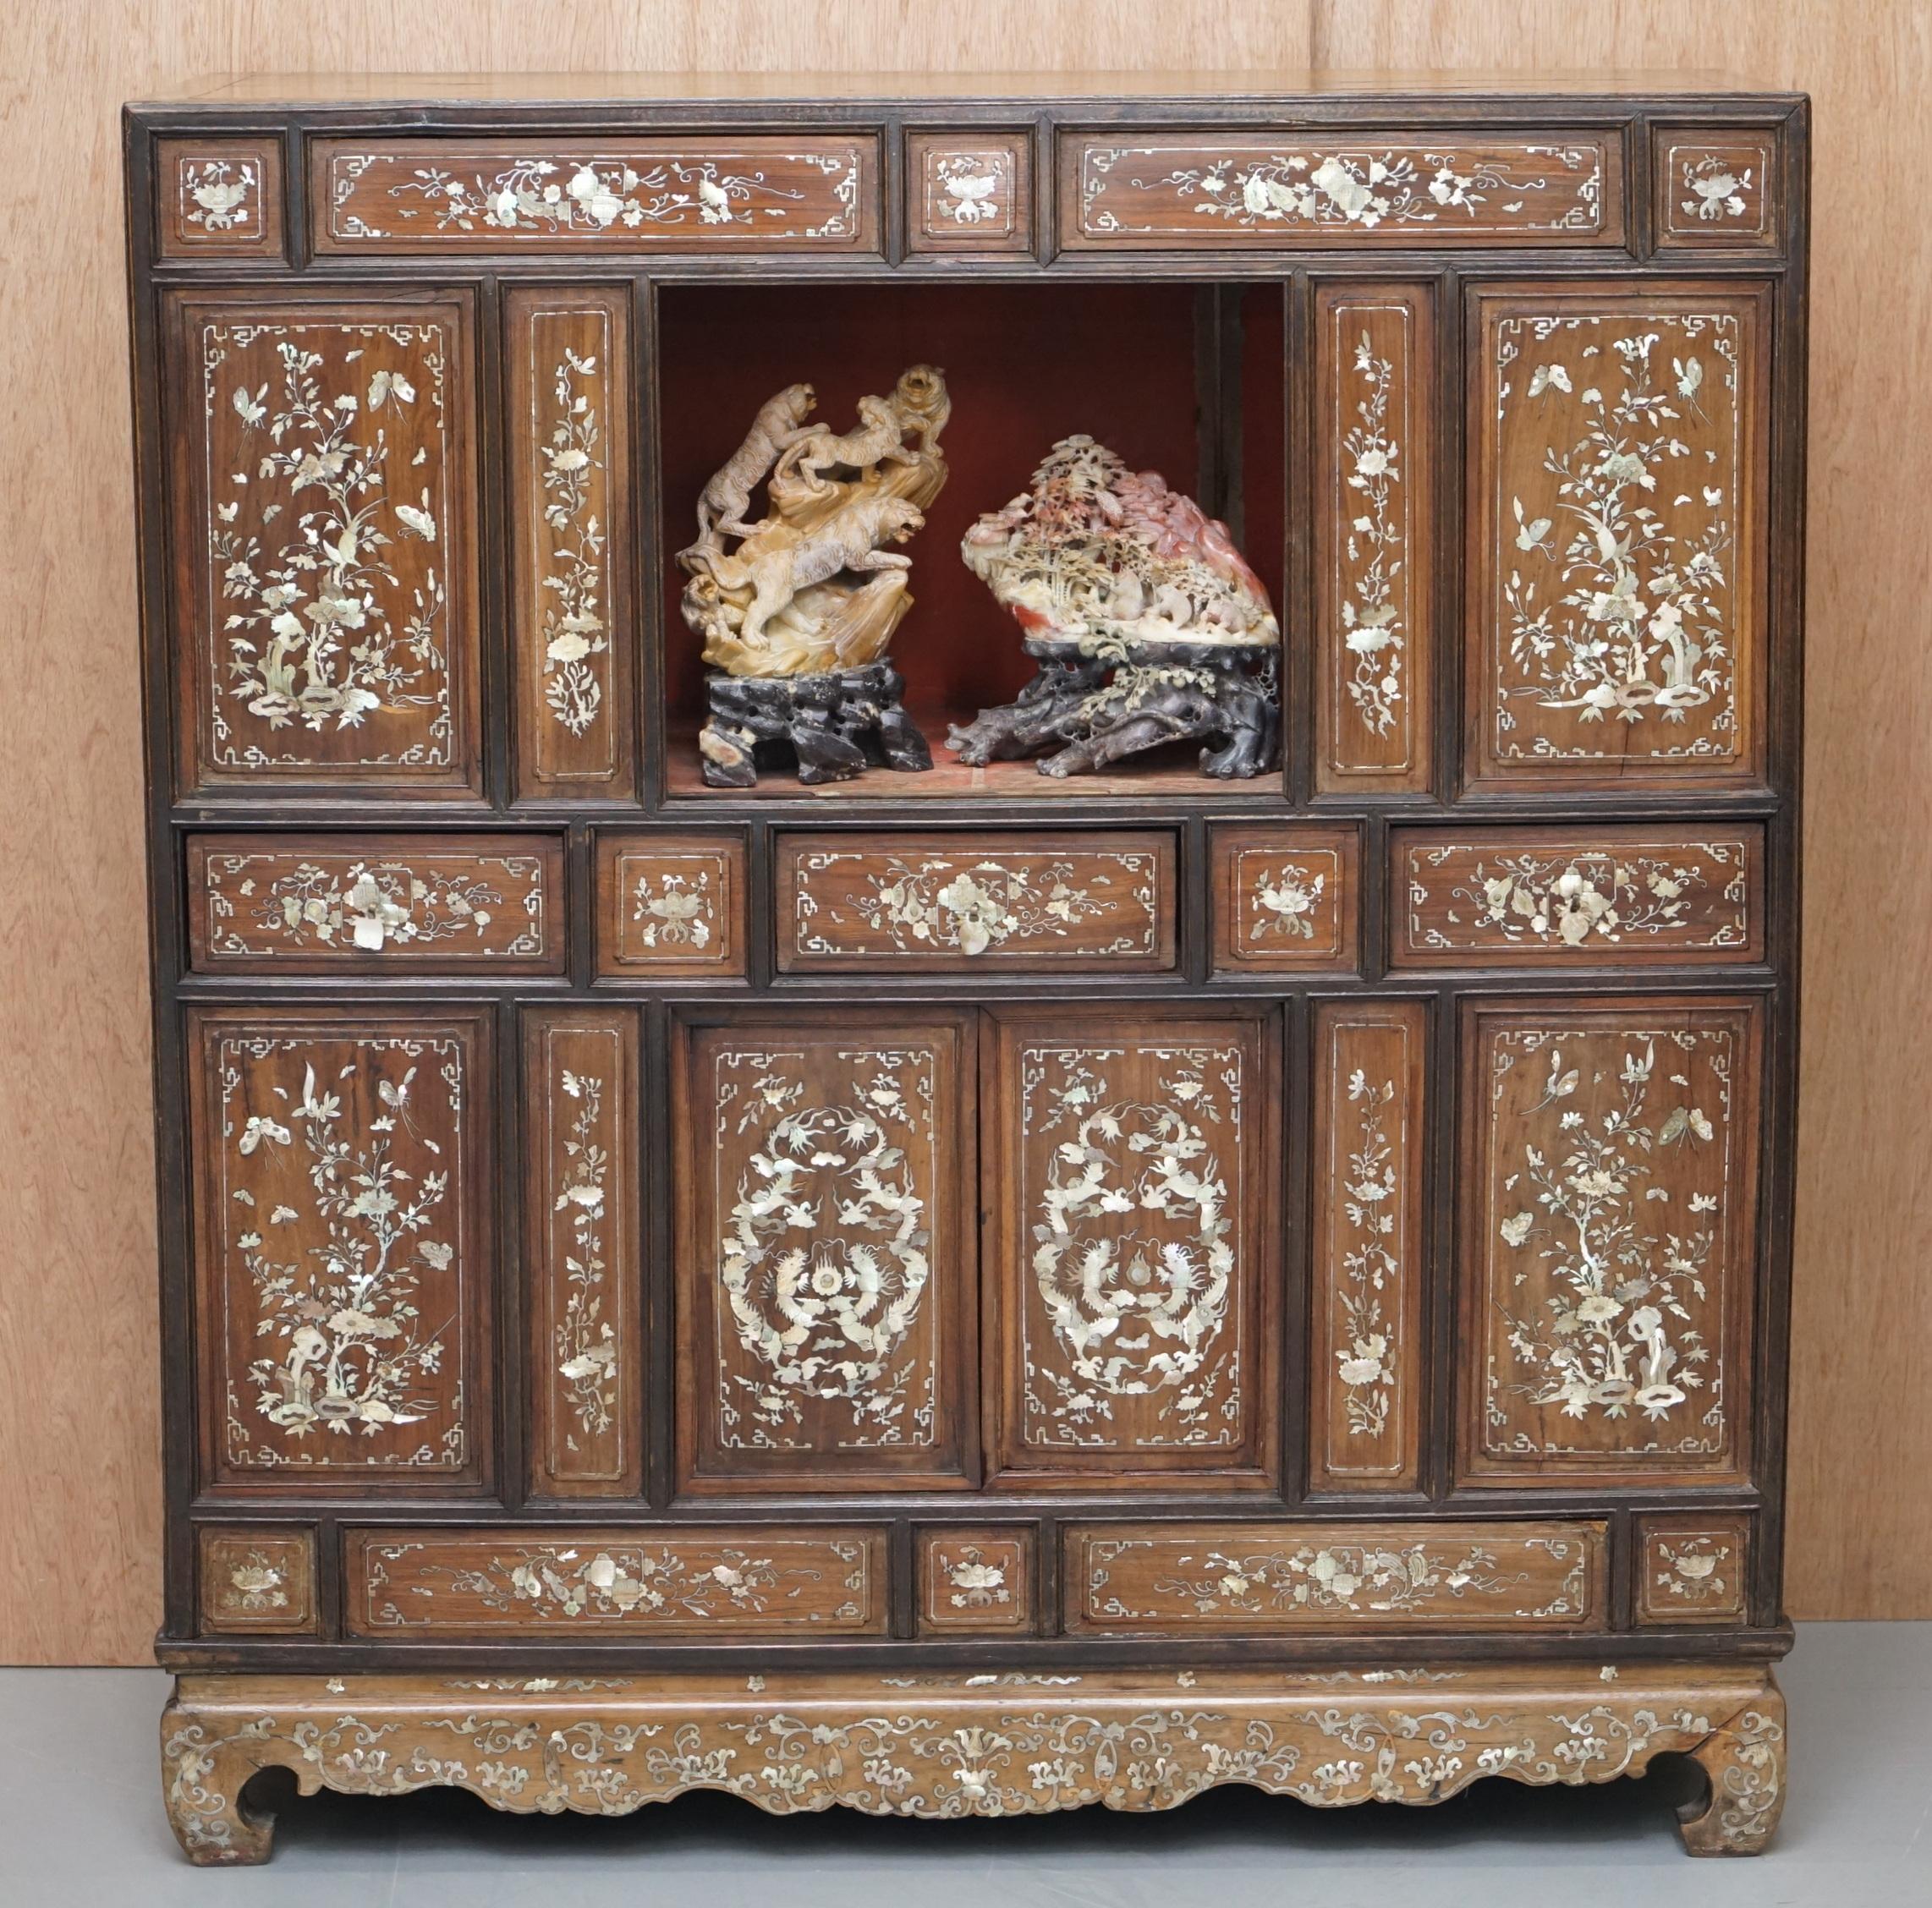 We are delighted to offer for sale this stunning exceptionally rare original circa 1820 Chinese Mother of Pearl inlaid cabinet 

A very rare and collectable piece, it has two cupboards three drawers and a nice platform on top for displaying